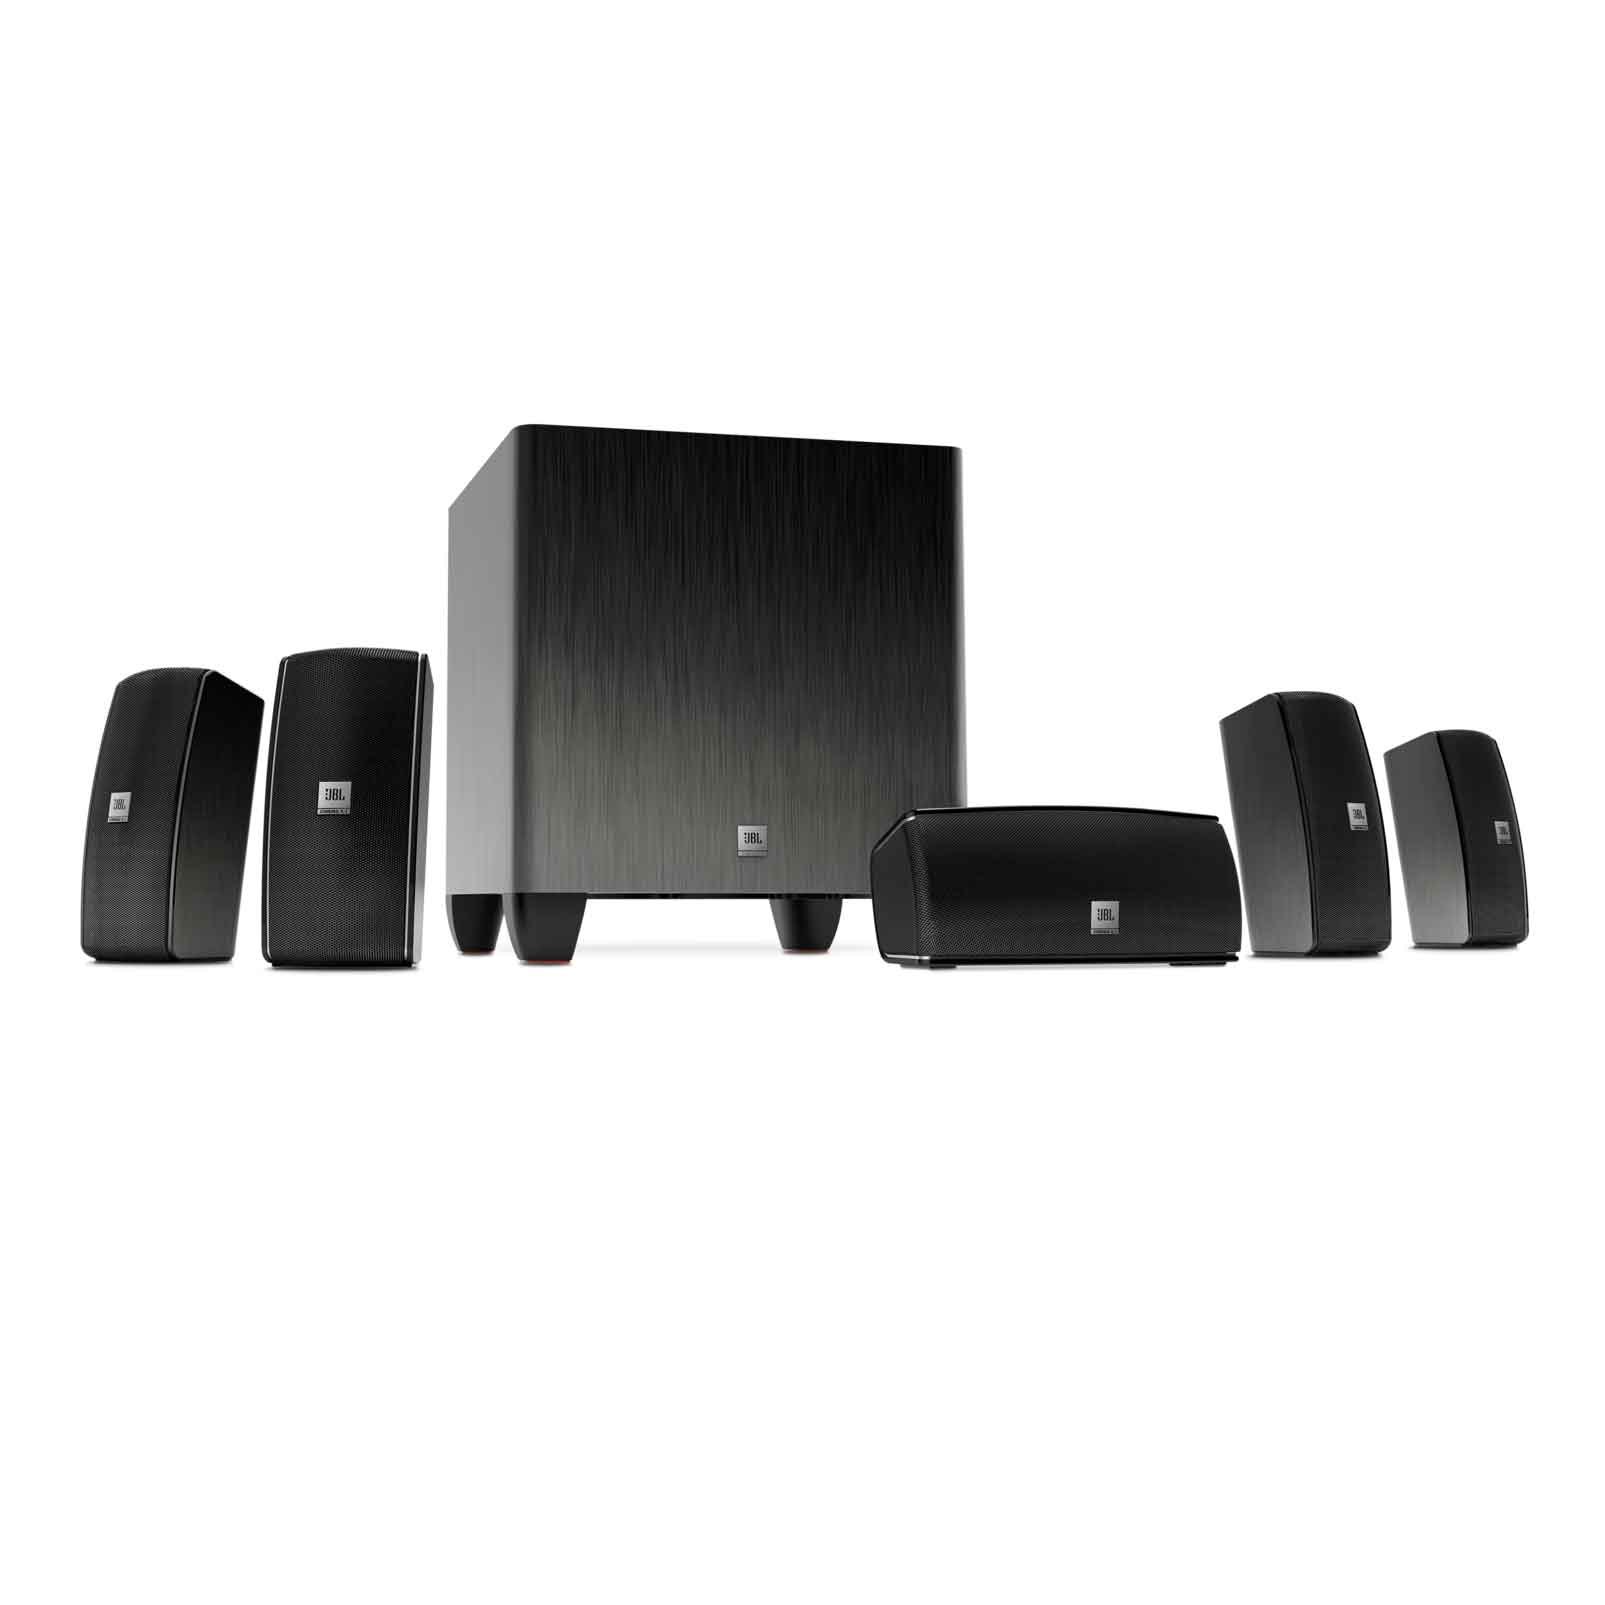 JBL Cinema 610 - 5.1 Home Theater System with Powered Subwoofer Symphony Hifi